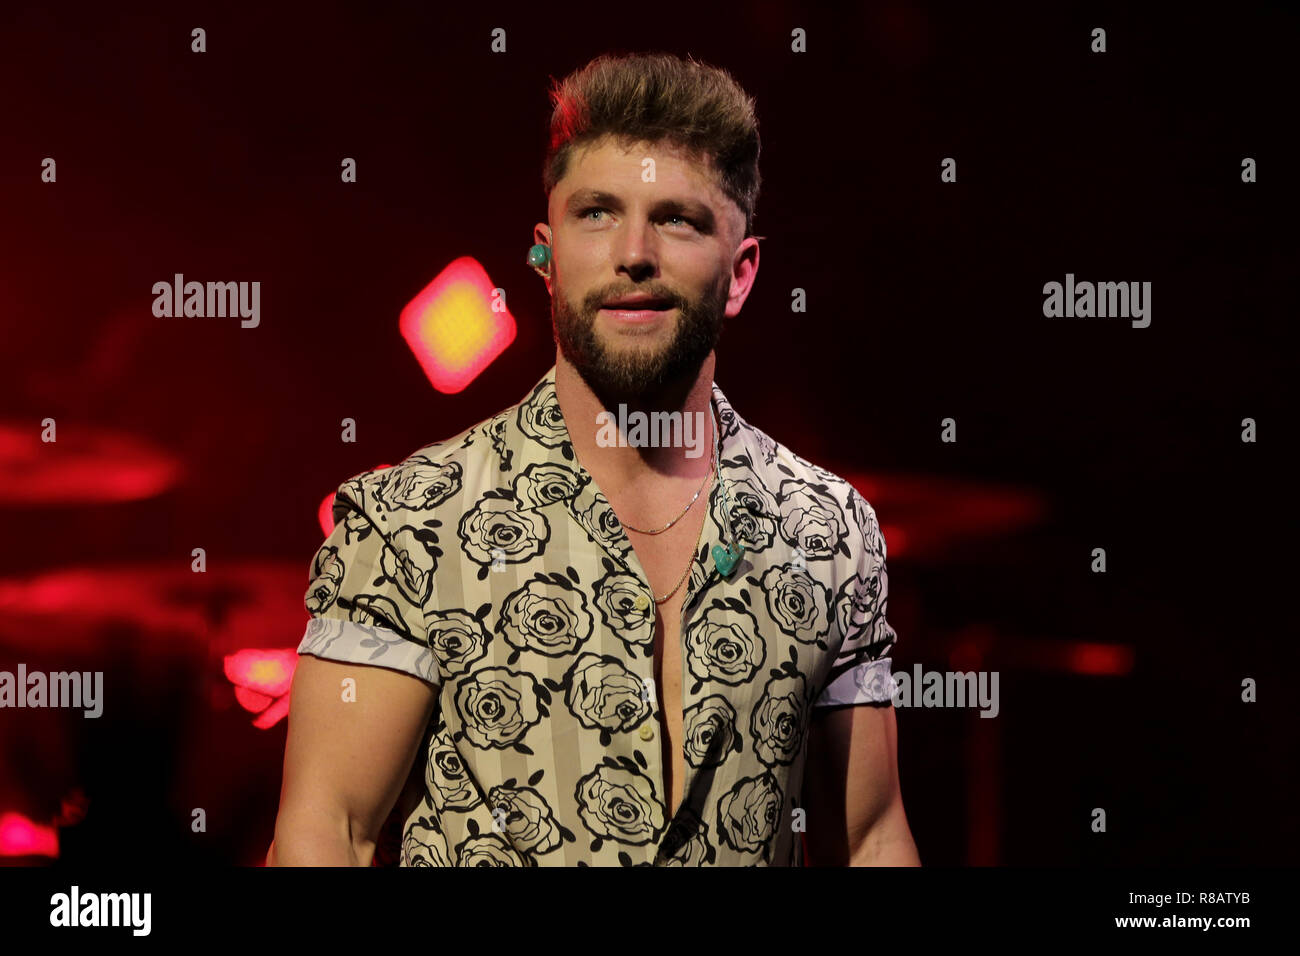 New York, USA. 13th December, 2018. Chris Lane performs in concert at Irving Plaza on December 13, 2018 in New York City Credit: AKPhoto/Alamy Live News Stock Photo